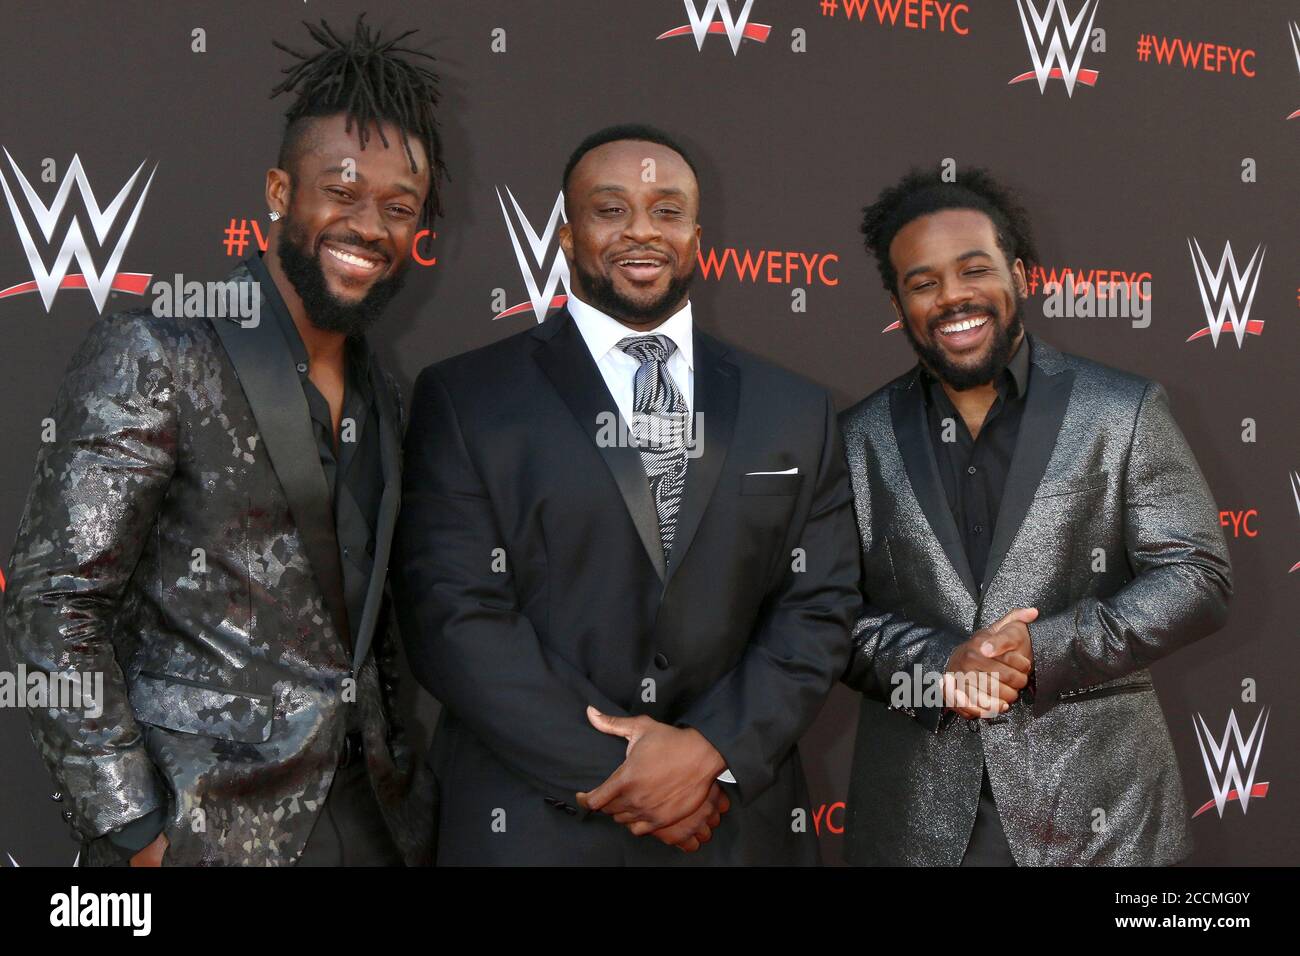 LOS ANGELES - JUN 6:  Kofi Kingston, Big E, Xavier Woods, The New Day at the WWE For Your Consideration Event at the TV Academy Saban Media Center on June 6, 2018 in North Hollywood, CA Stock Photo